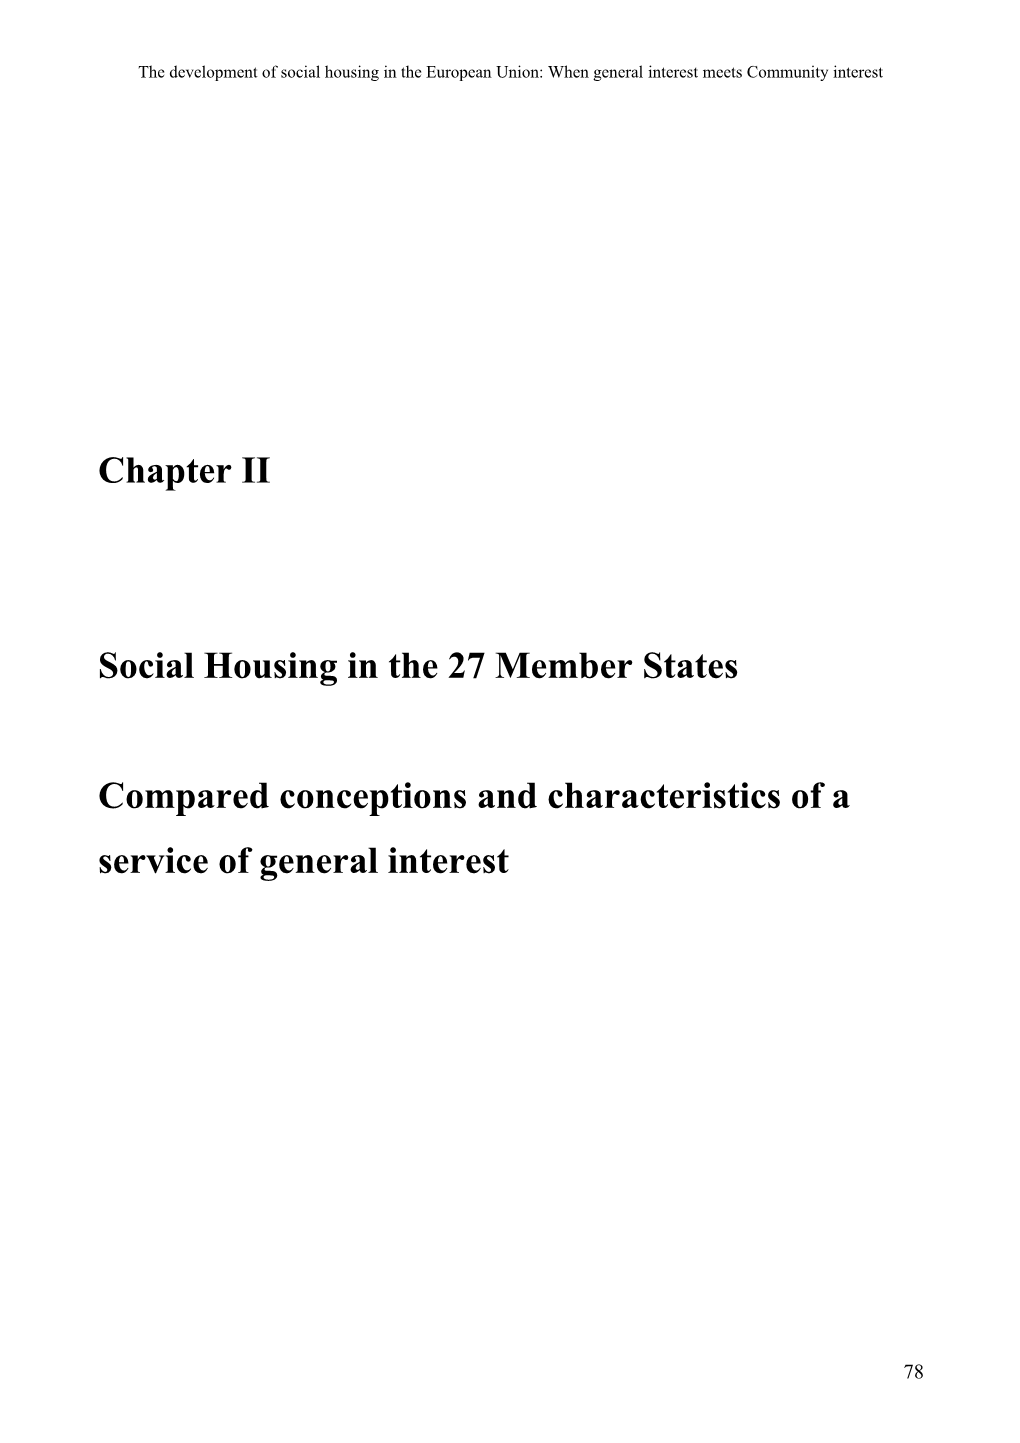 Social Housing in the 27 Member States